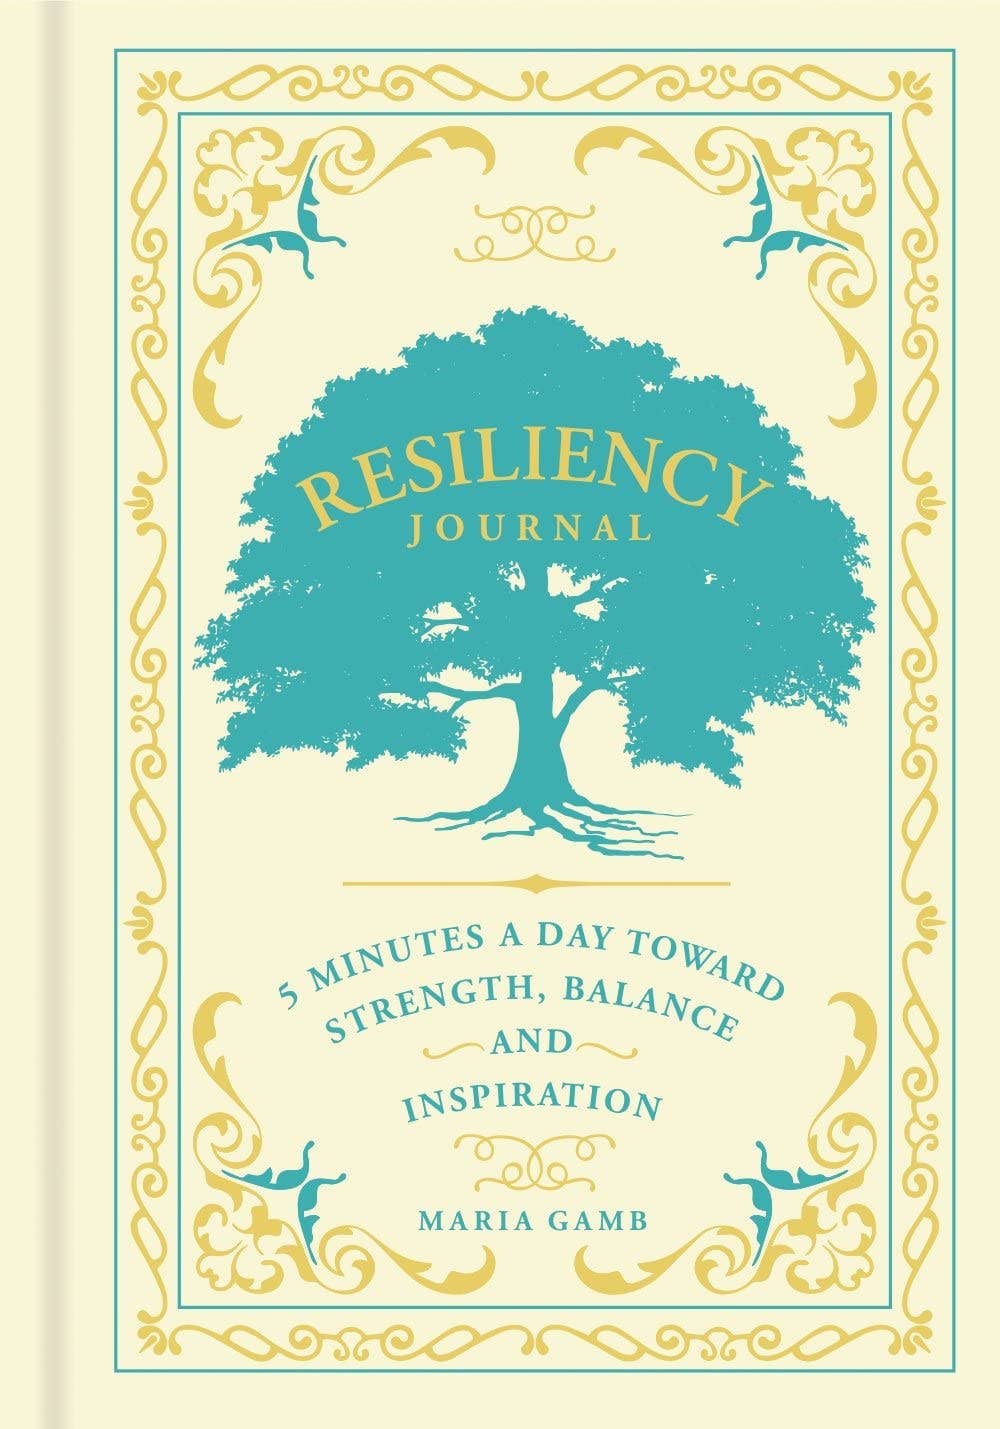 Journal, Resiliency: 5 Minutes a Day Towards Strength